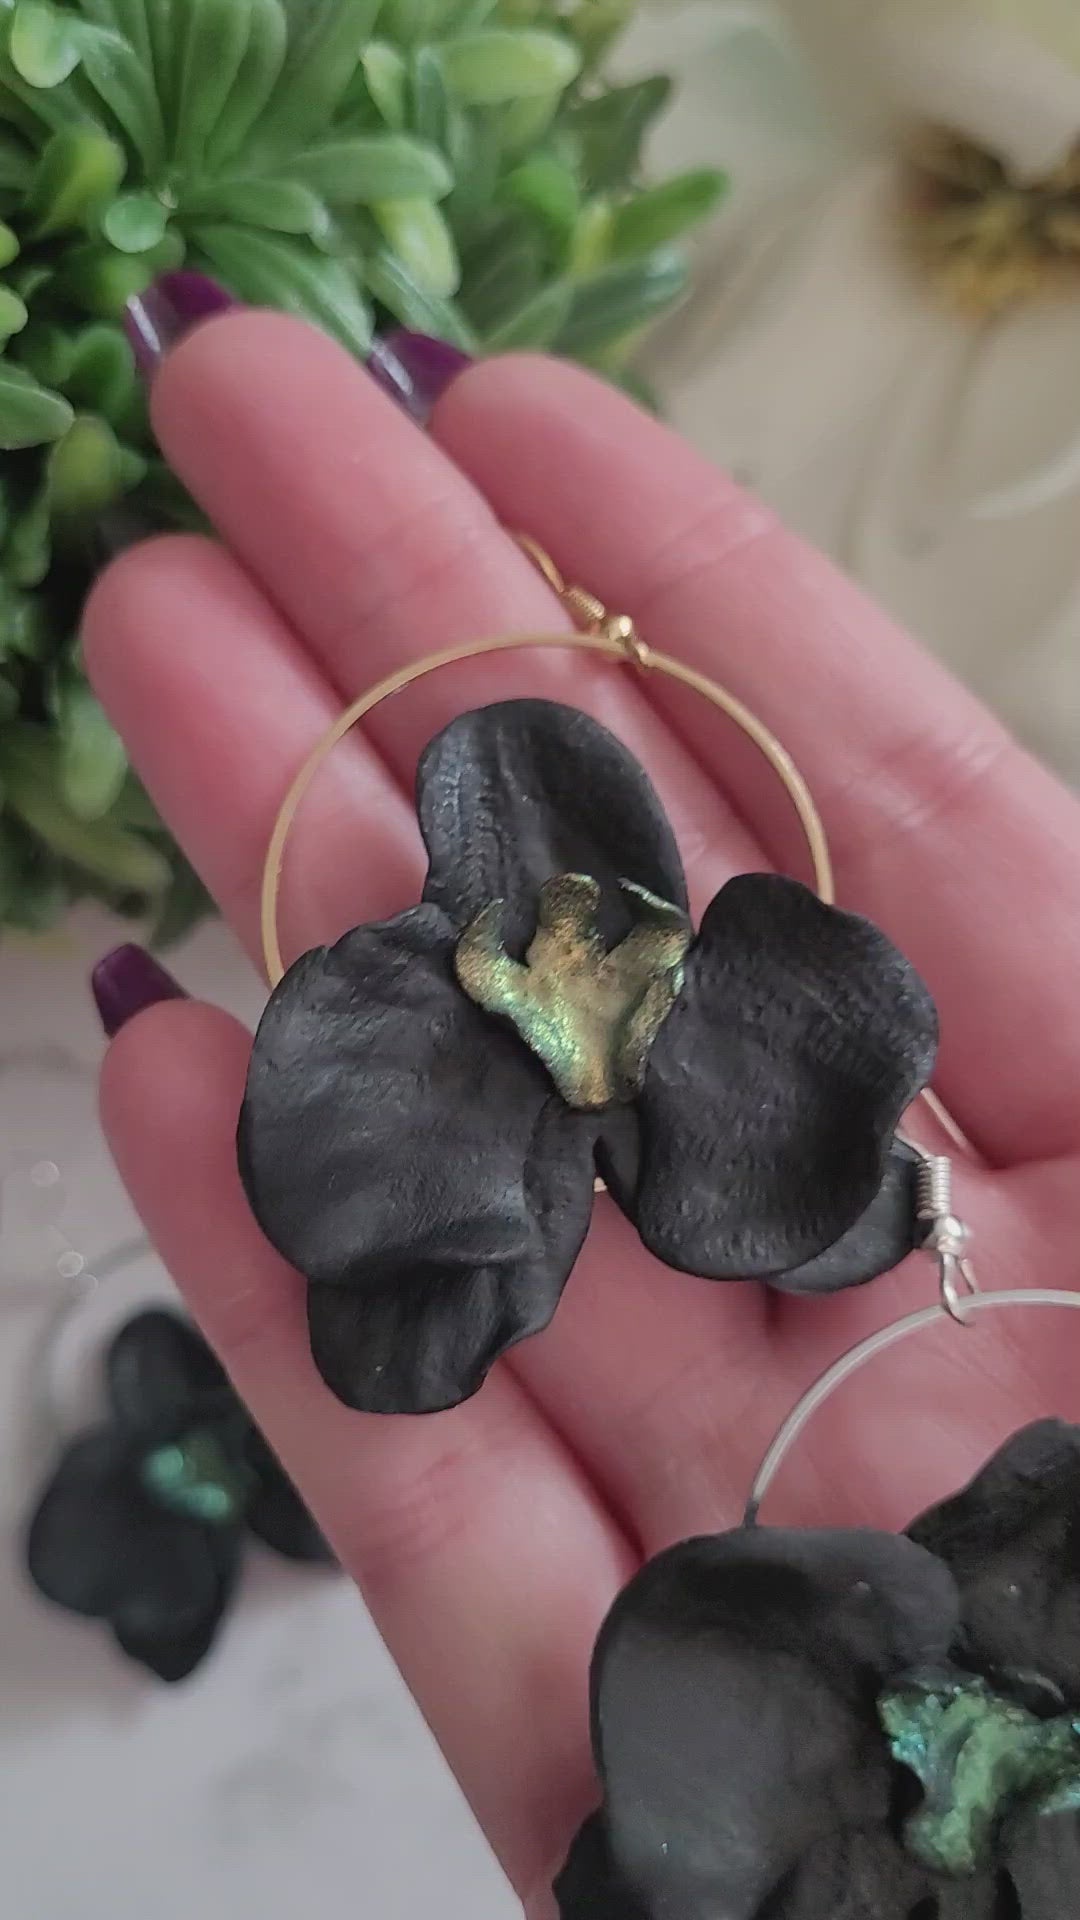 Closeup of three color variations in palm of hand. Earrings are made of black polymer clay in the shape of an orchid. 